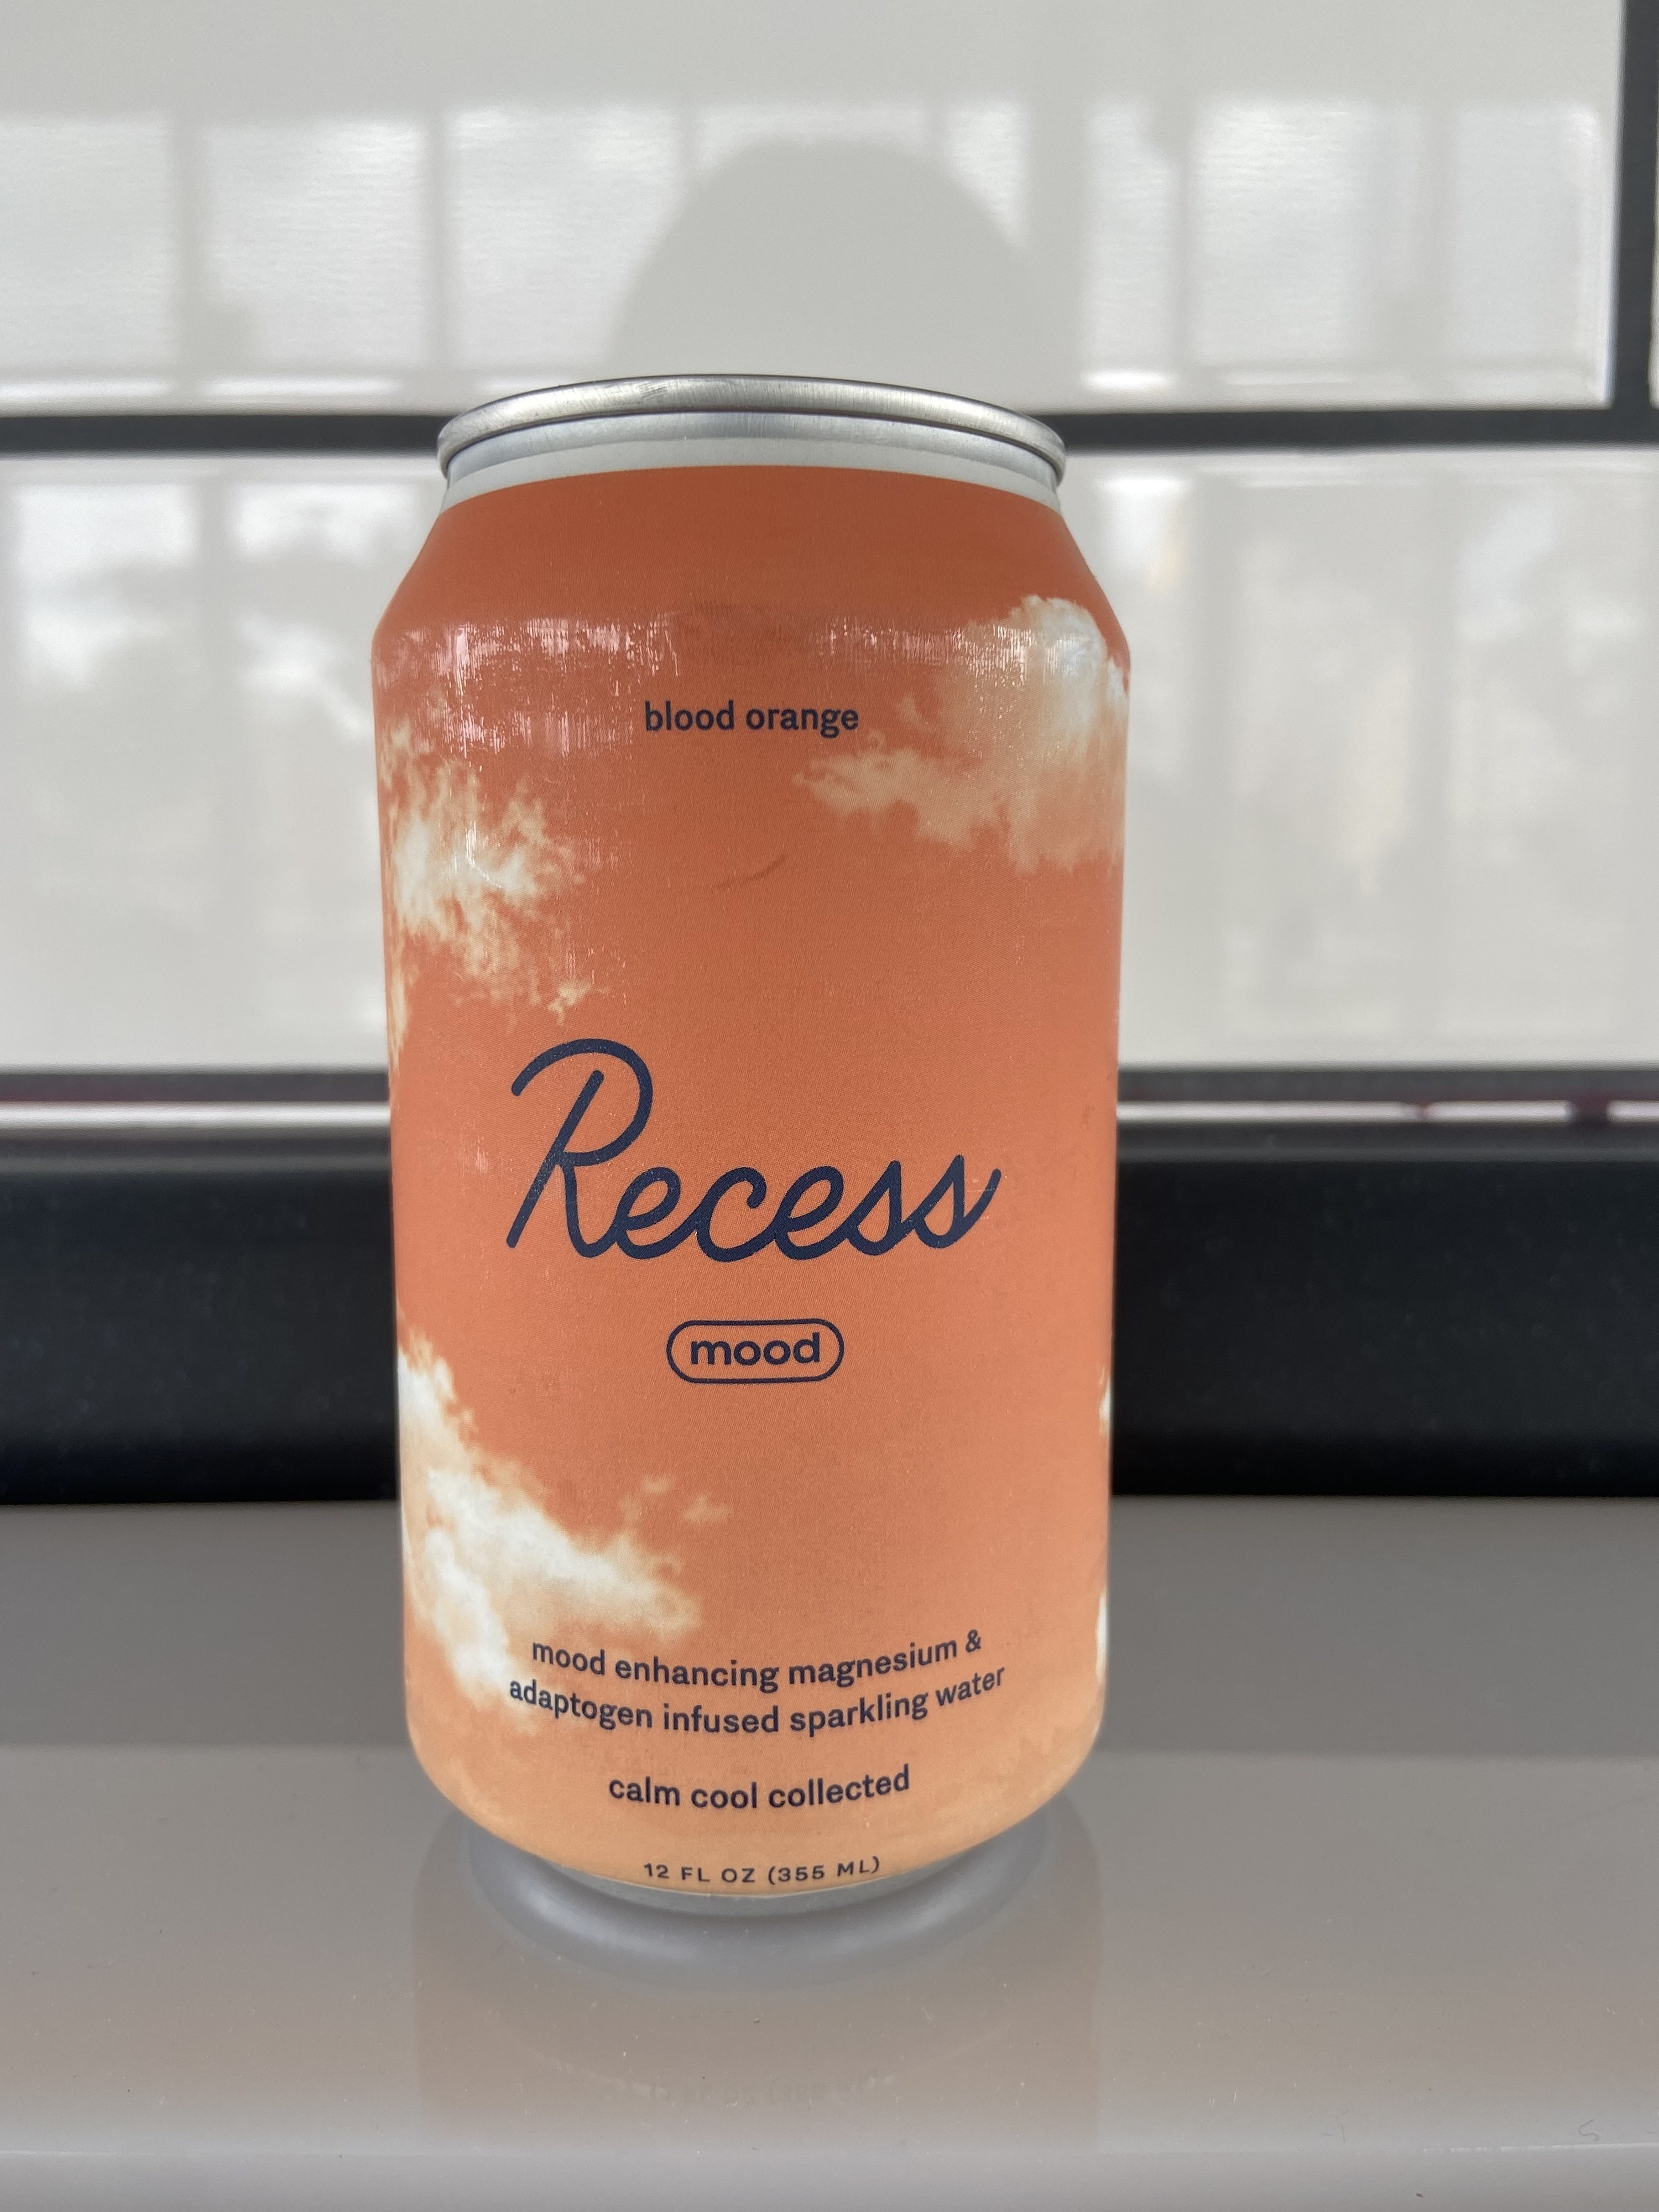 A can of Recess Mood Blood Orange